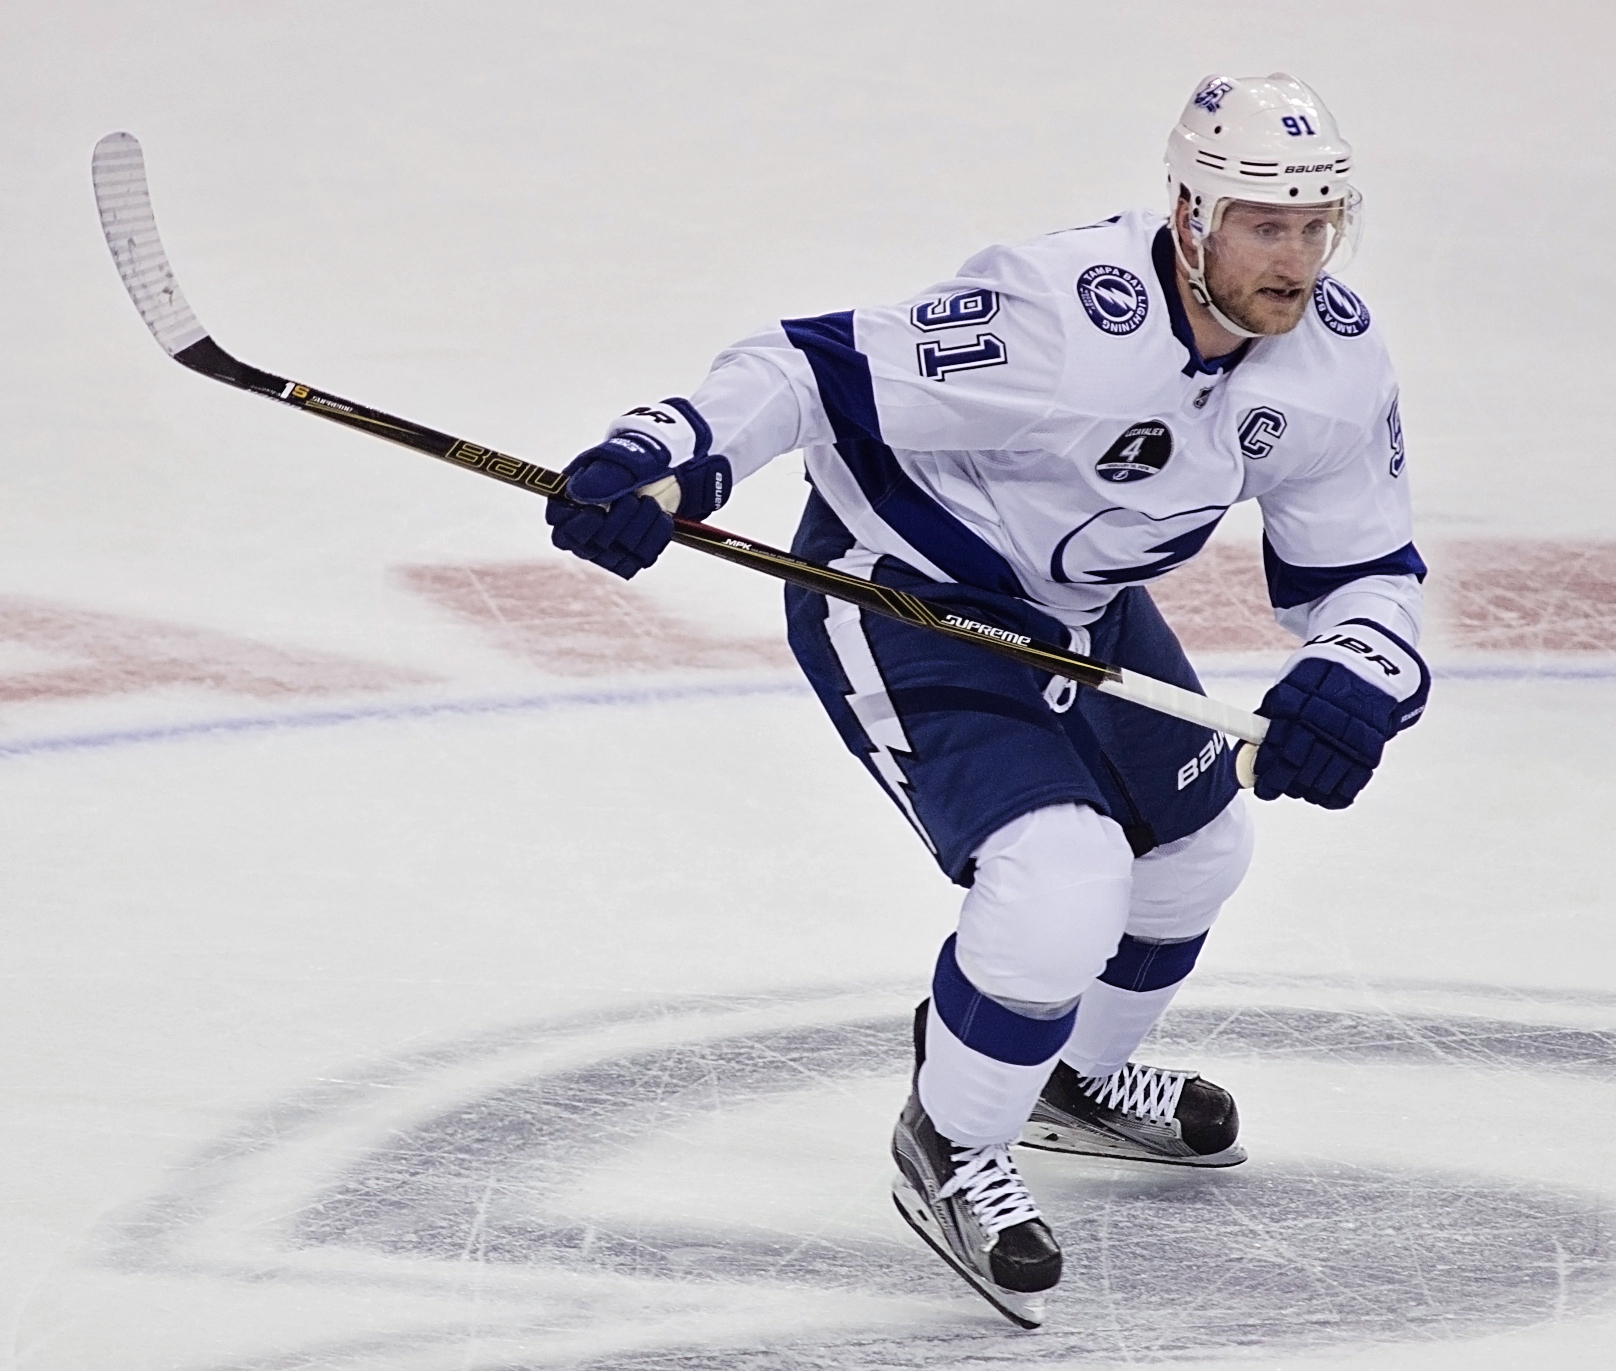 Stamkos had a goal and an assist in the victory./CARMEN MANDATO